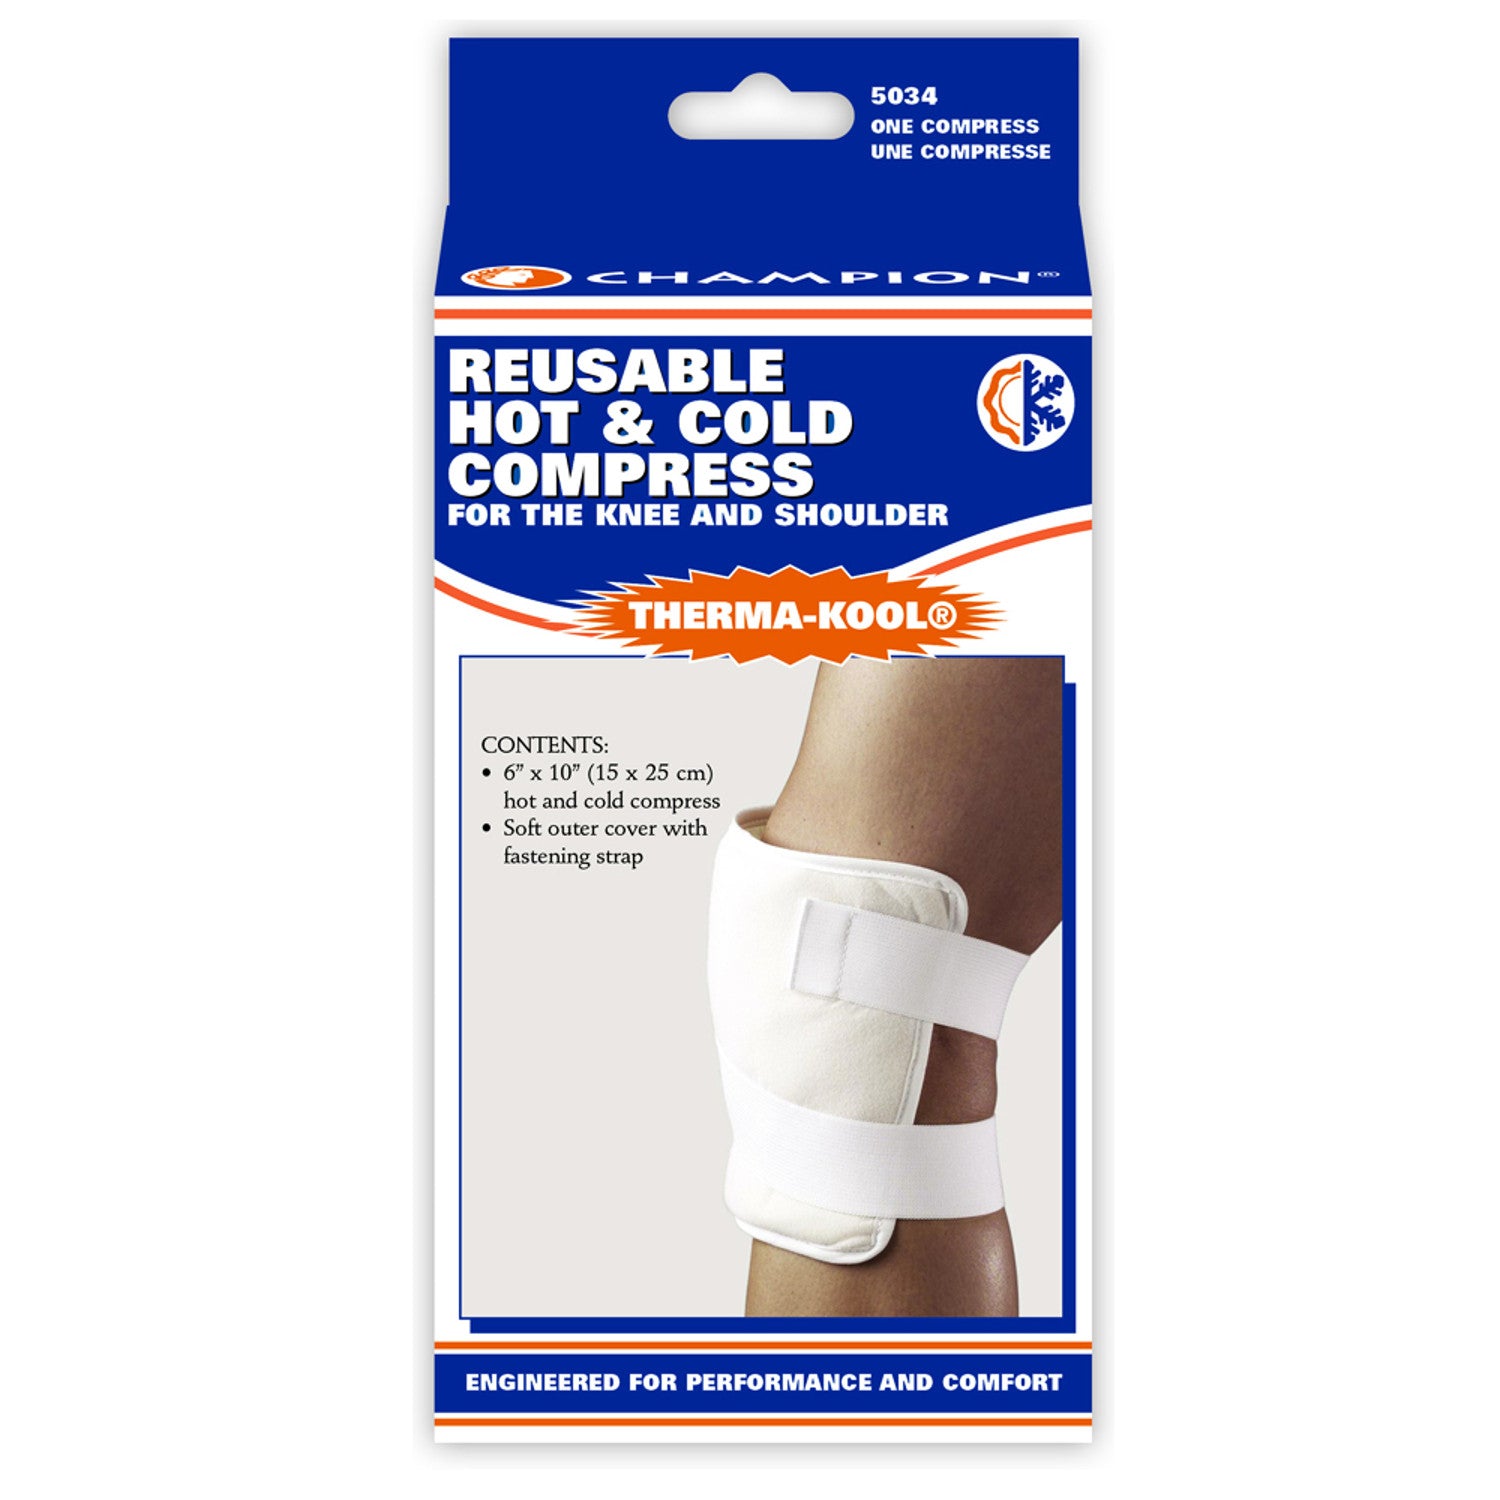 THERMA-KOOL REUSABLE HOT/COLD COMPRESS – ChampionSupports